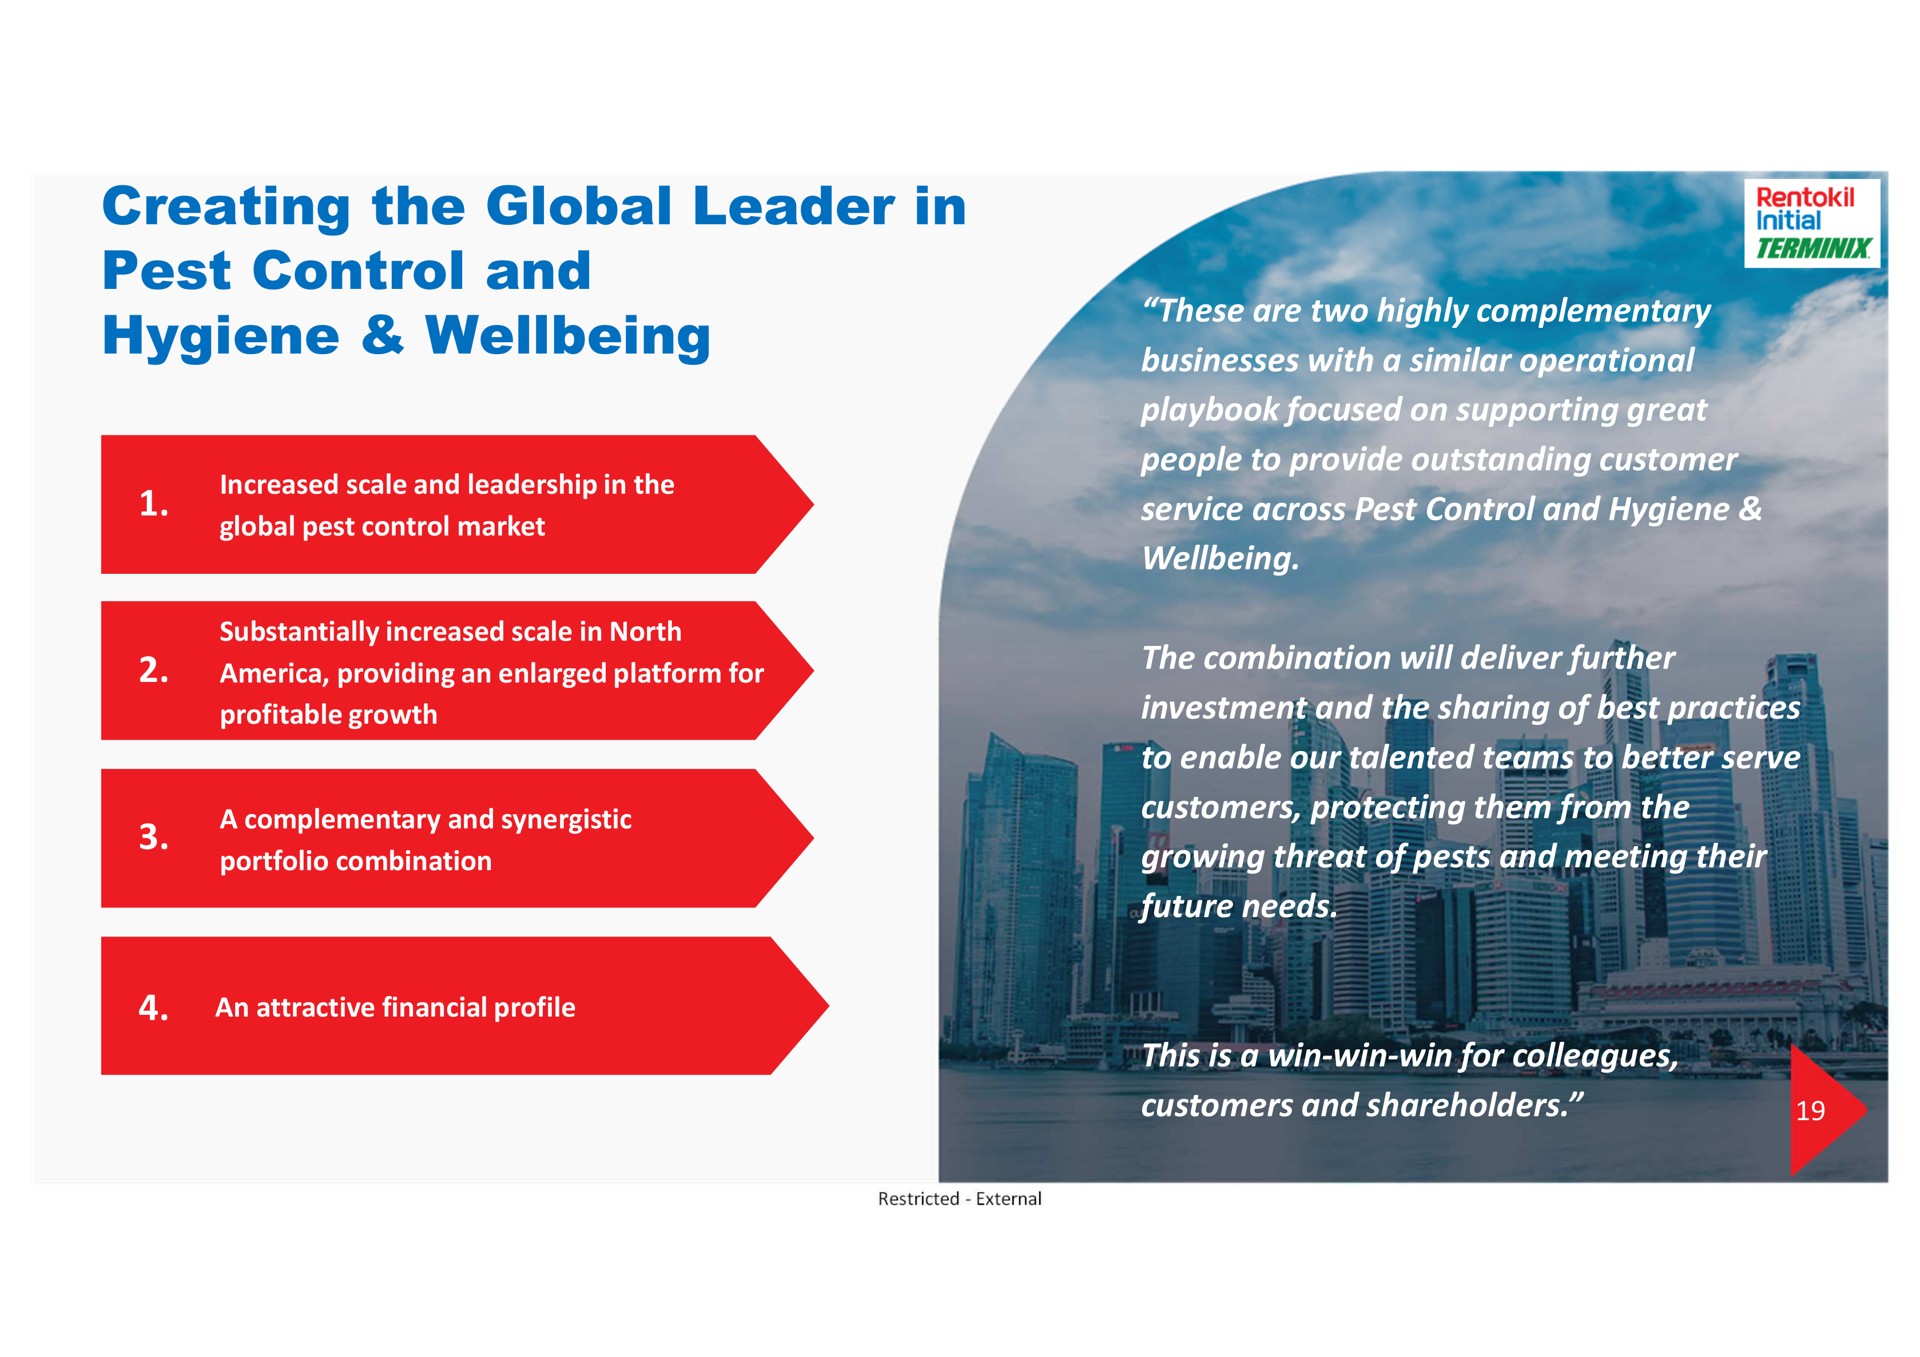 creating the global leader in pest control and hygiene | Rentokil Initial